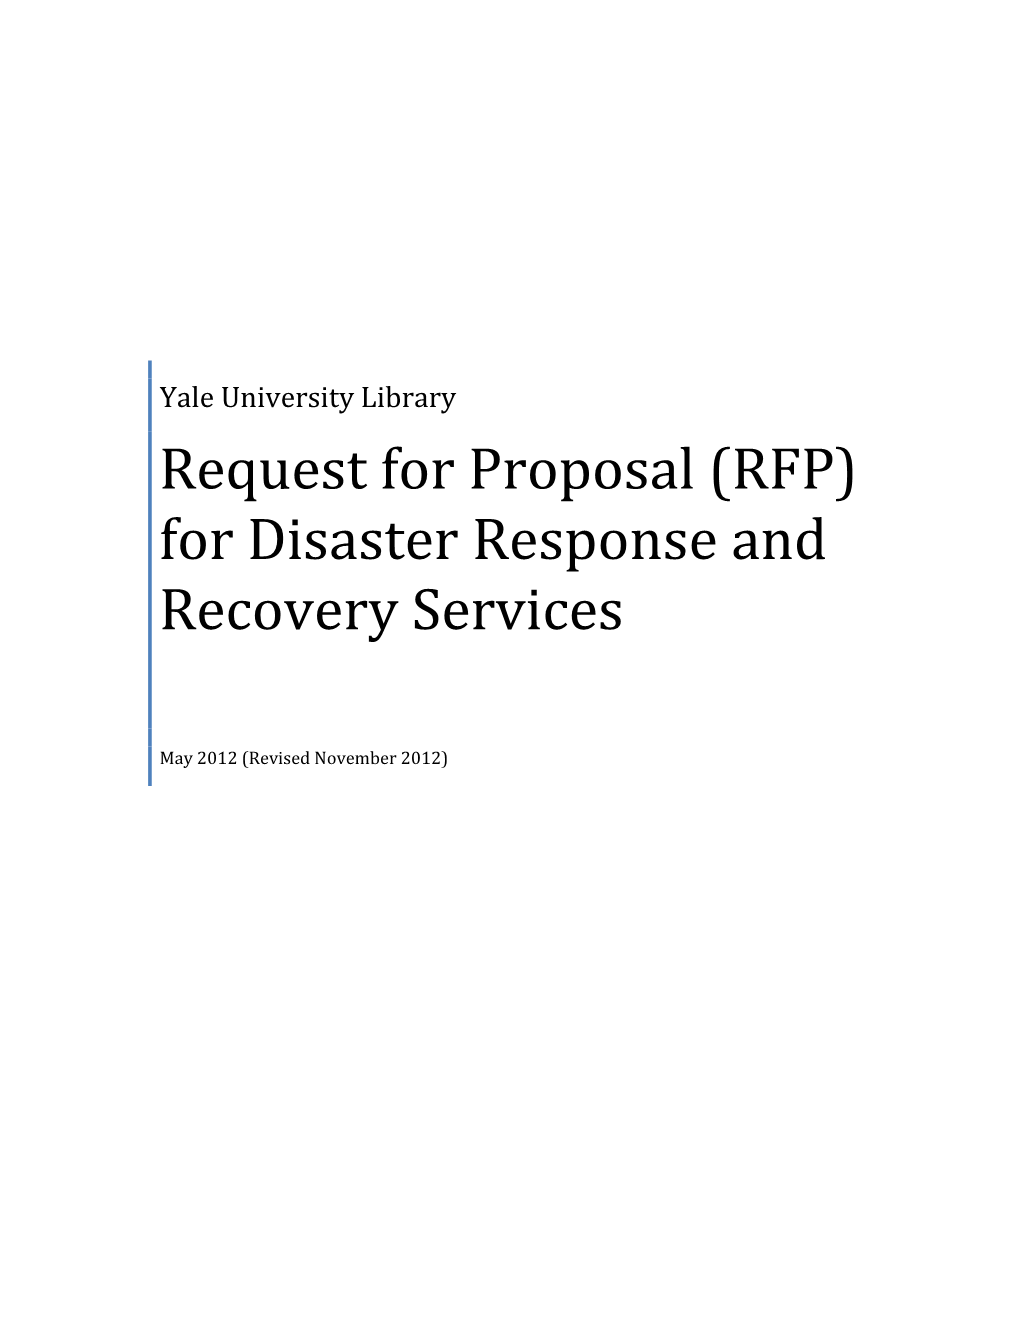 RFP) for Disaster Response and Recovery Services